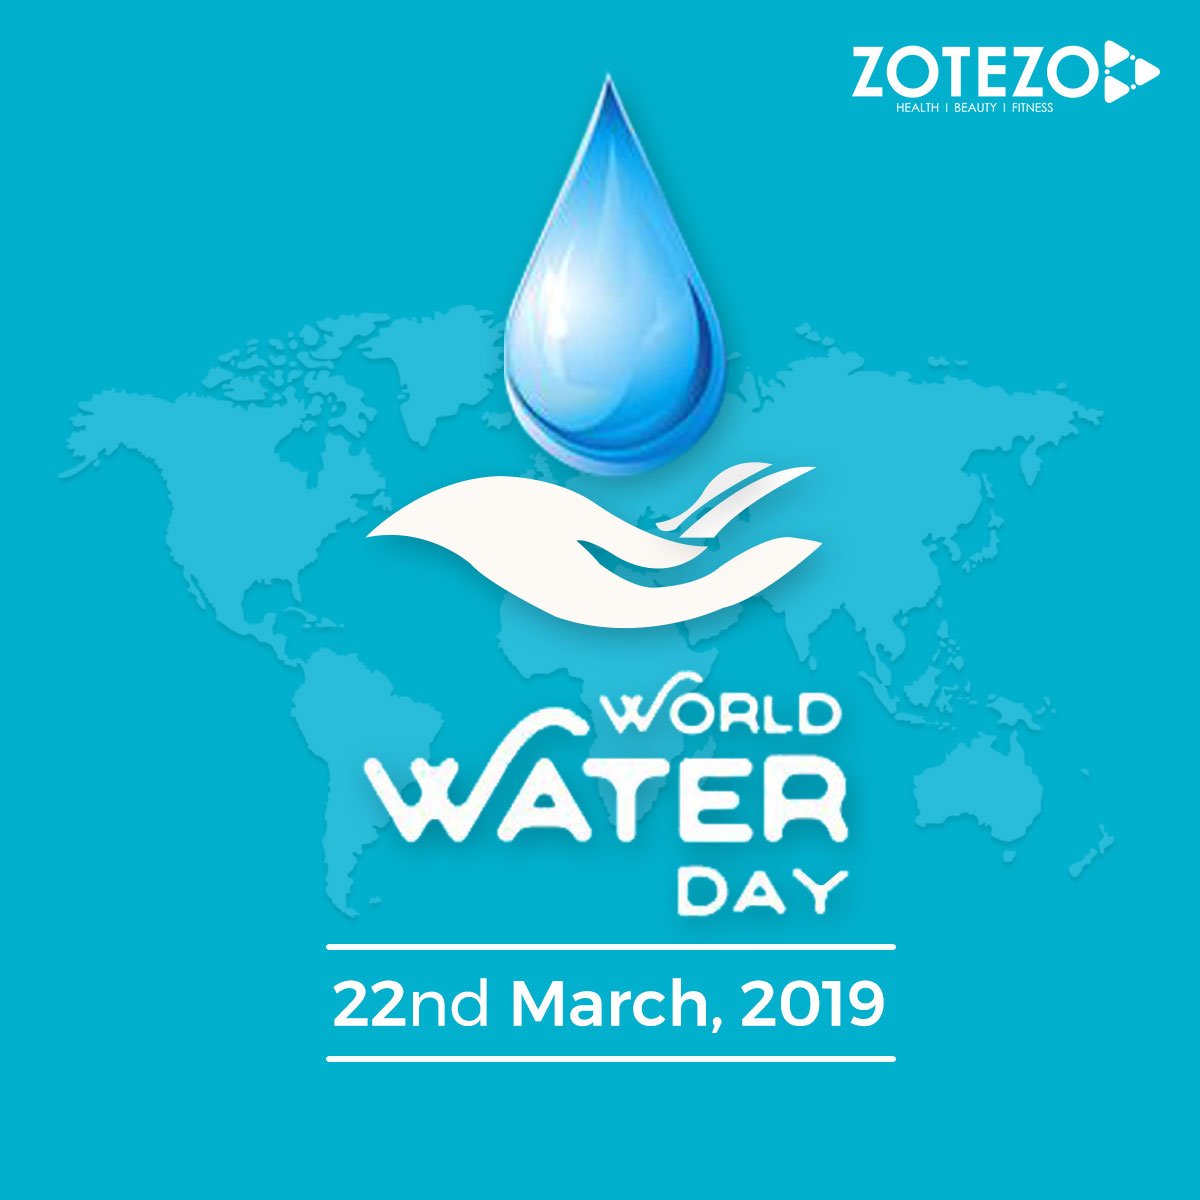 Water covers 2/3 of the surface of the Earth but only 0.002% is Drinkable... #SaveWater #SaveLife #WorldWaterDay2019